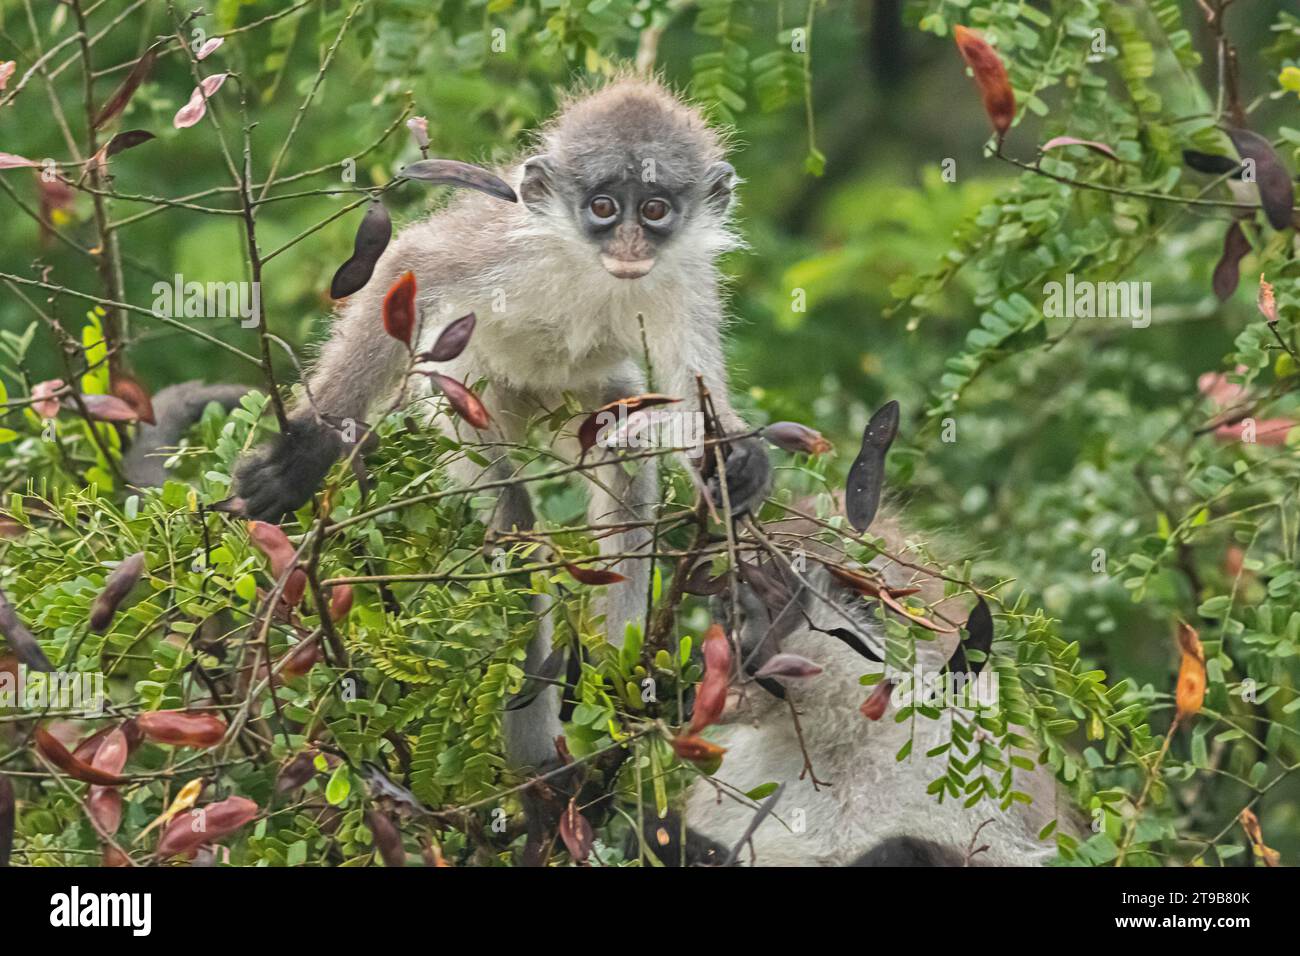 A juvenile Dusky leaf monkey or Spectacled langur (Trachypithecus obscurus) foraging on tree in Malaysia. Stock Photo